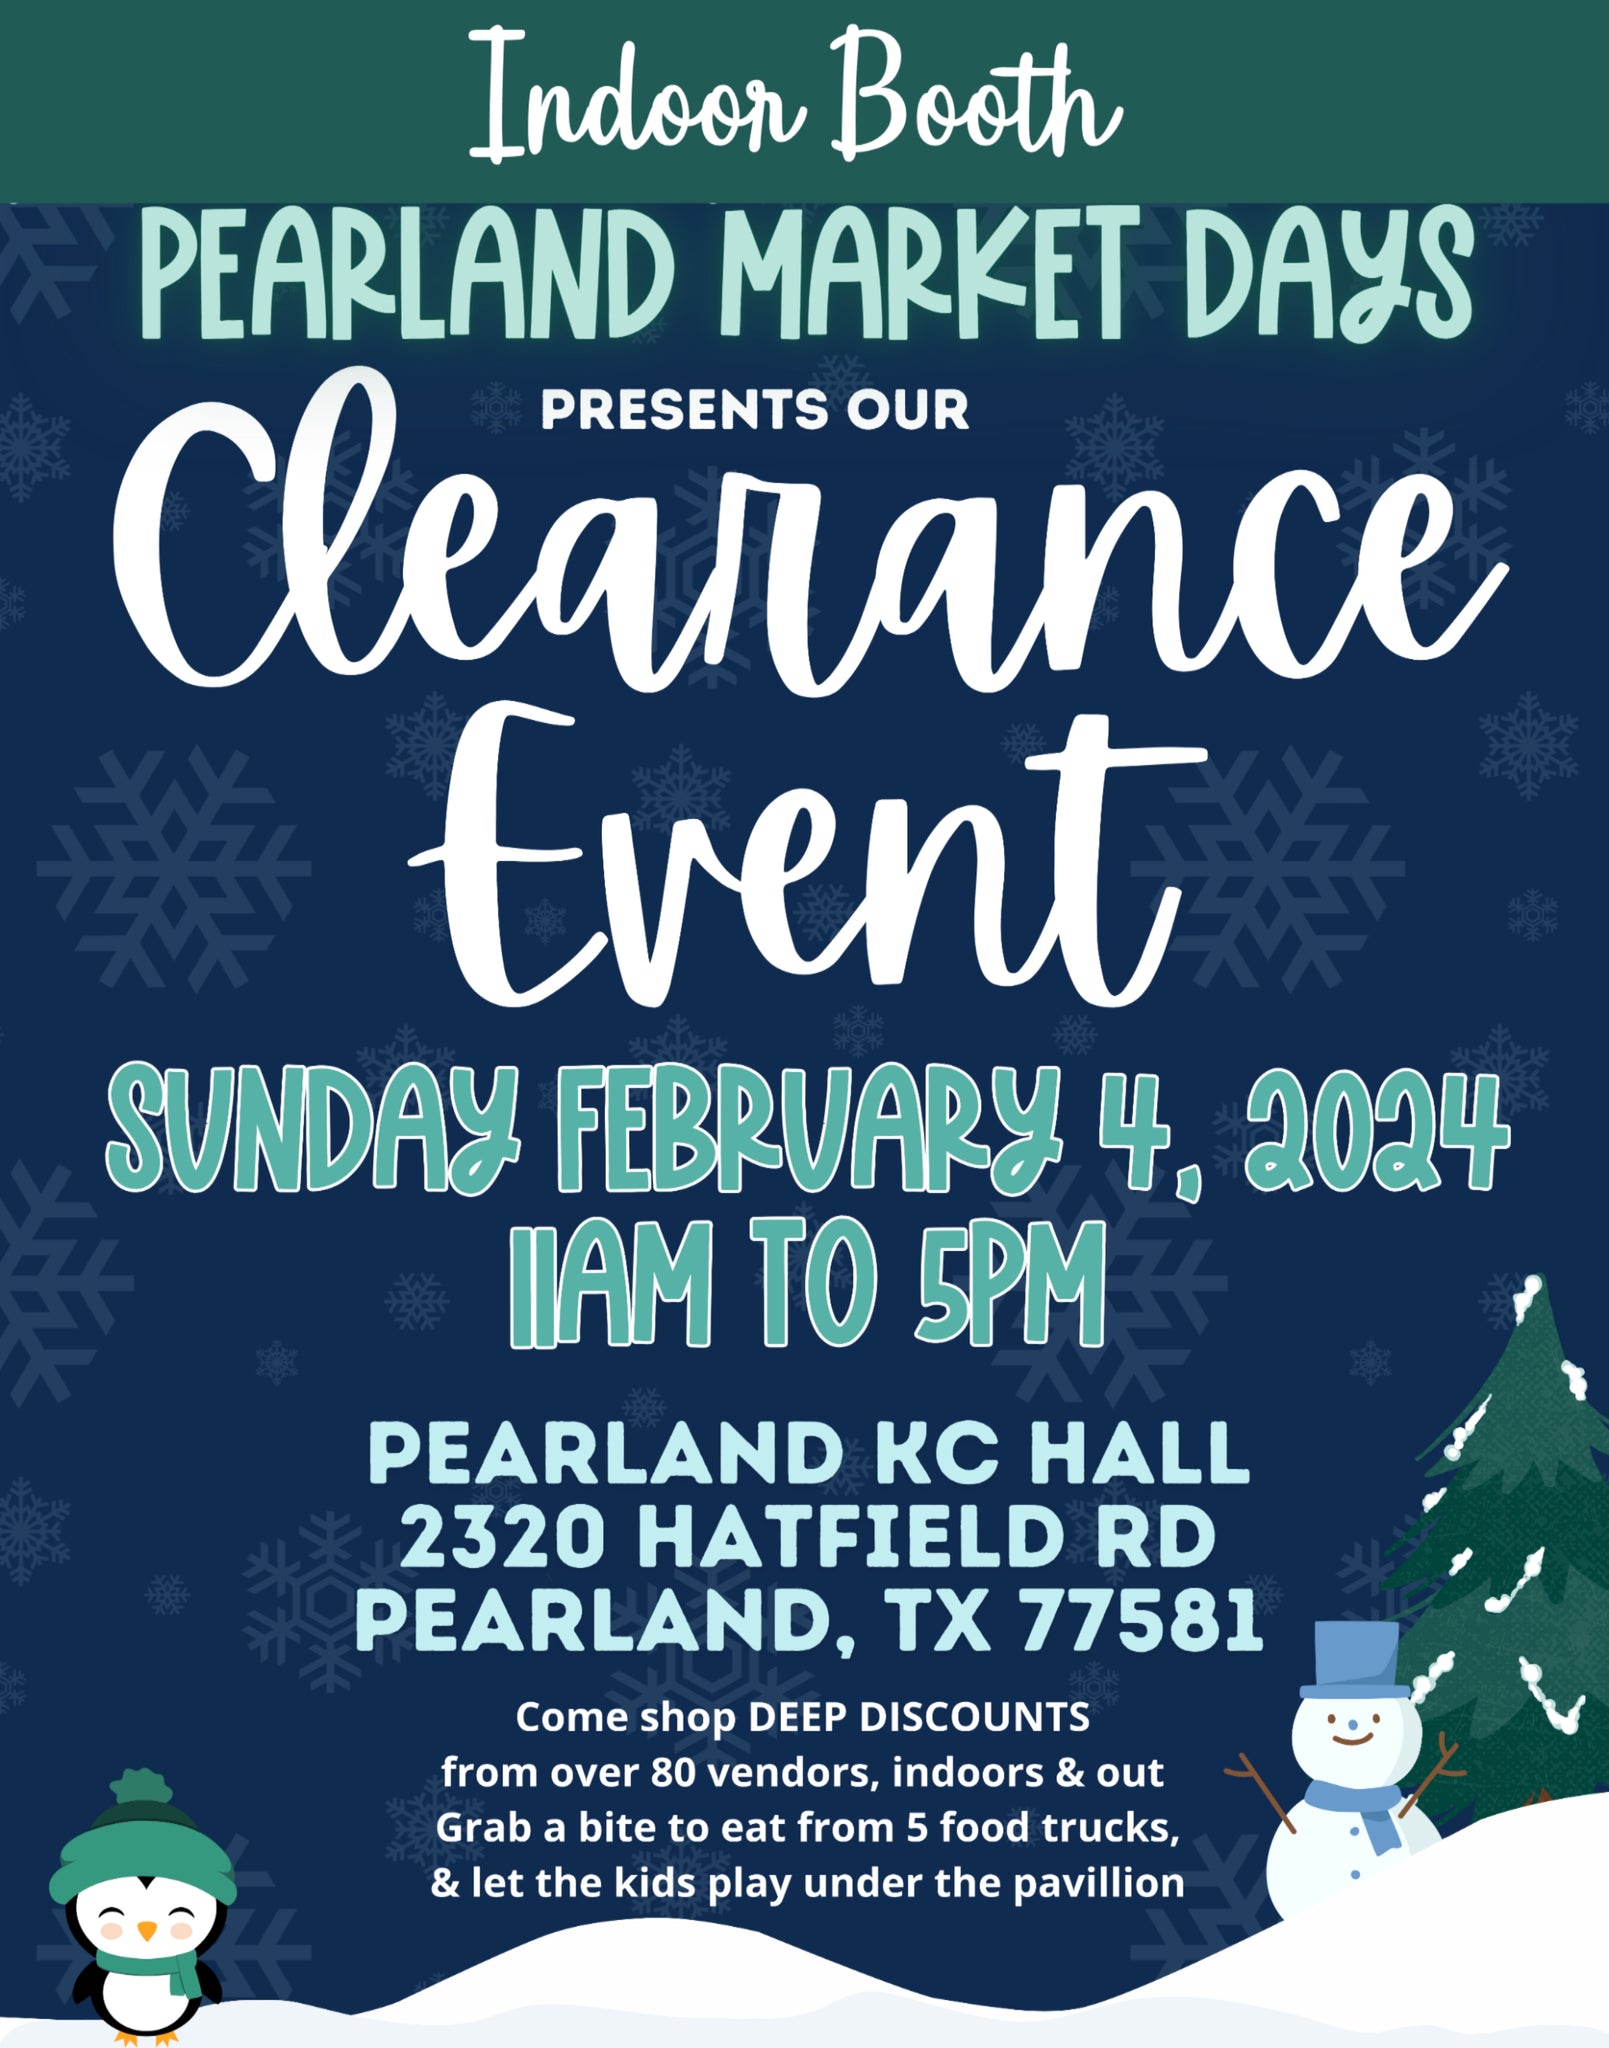 PEARLAND Sunday February 4, 2024 - INDOOR BOOTH